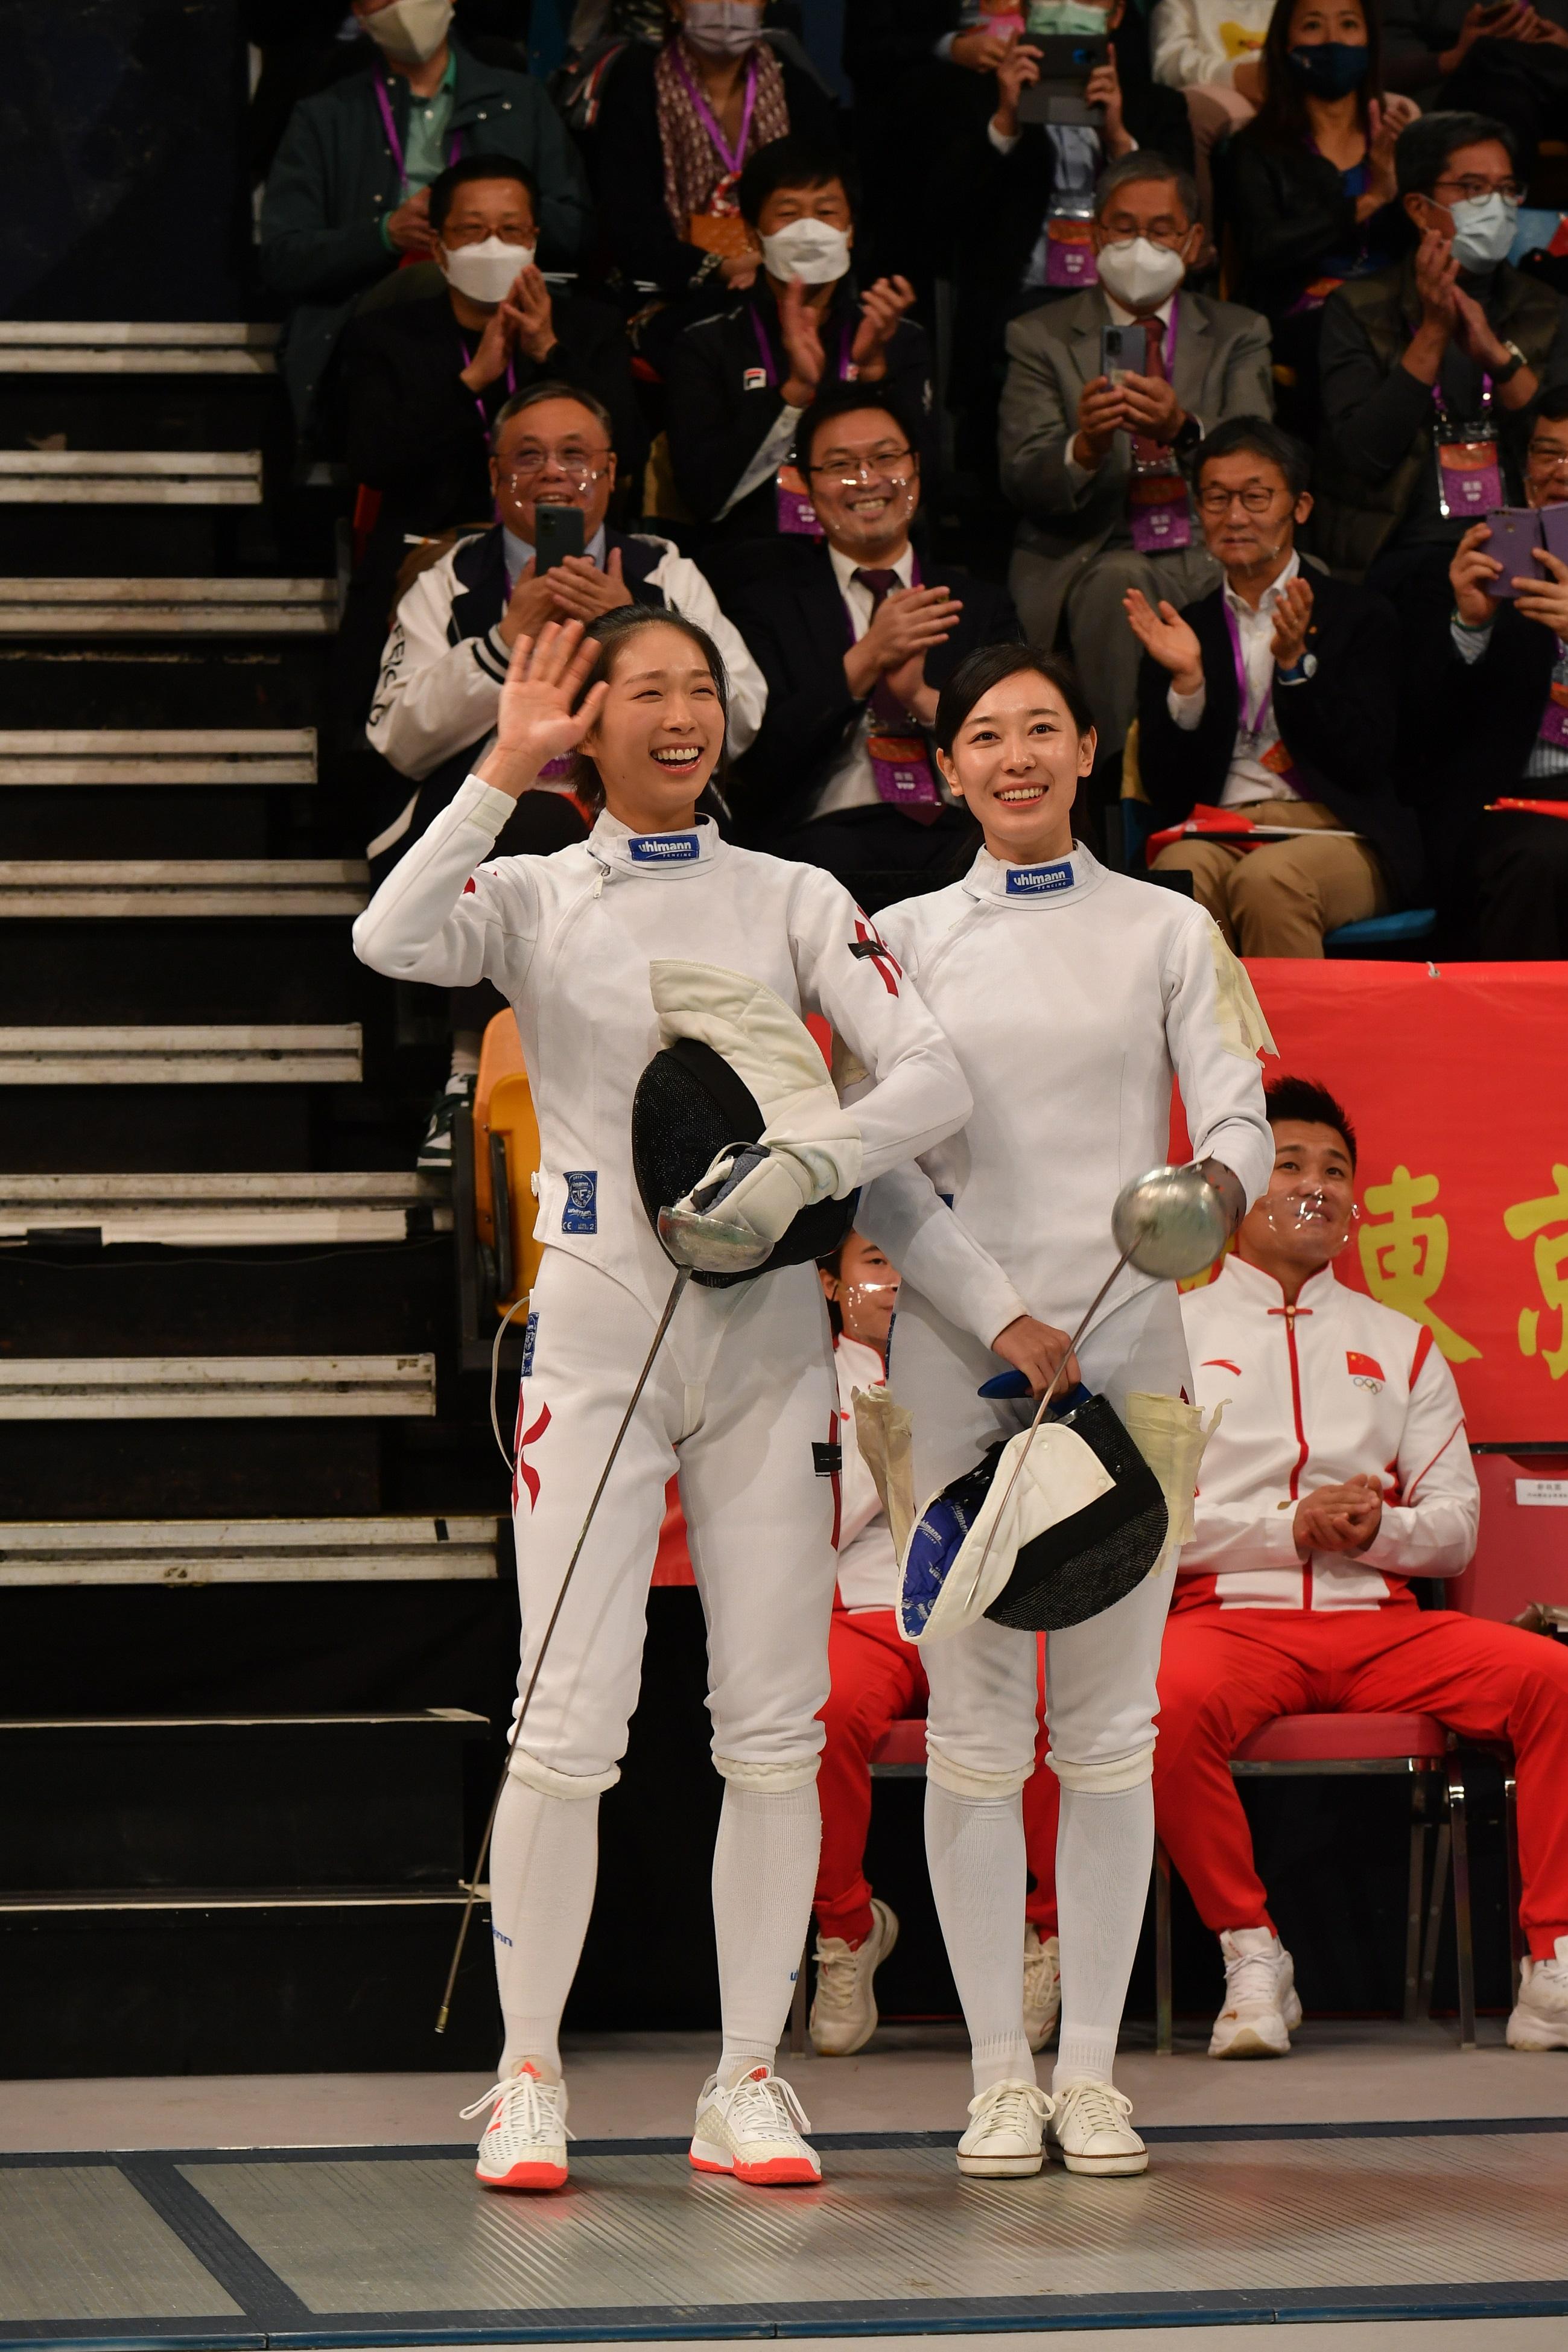 The delegation of Tokyo 2020 Olympic Games Mainland Olympians attended the sports demonstrations at Queen Elizabeth Stadium in Wan Chai this morning (December 4). Photo shows Mainland fencing athlete Sun Yiwen (right) and Hong Kong fencing athlete Vivian Kong (left) attending the event.